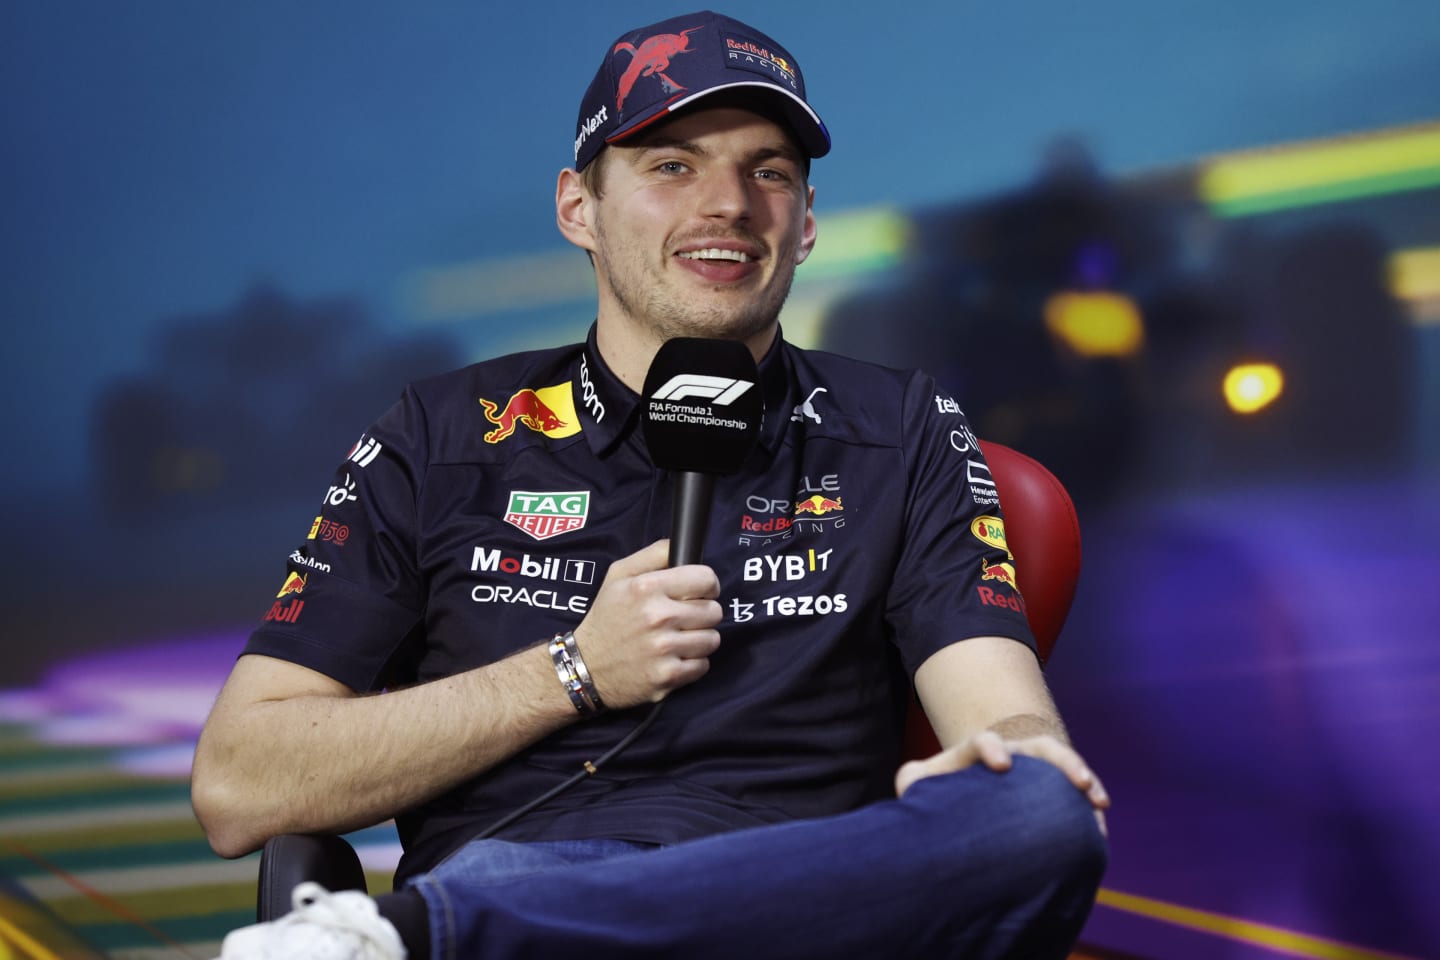 SAO PAULO, BRAZIL - NOVEMBER 10: Max Verstappen of the Netherlands and Oracle Red Bull Racing attends the Drivers Press Conference during previews ahead of the F1 Grand Prix of Brazil at Autodromo Jose Carlos Pace on November 10, 2022 in Sao Paulo, Brazil. (Photo by Jared C. Tilton/Getty Images)